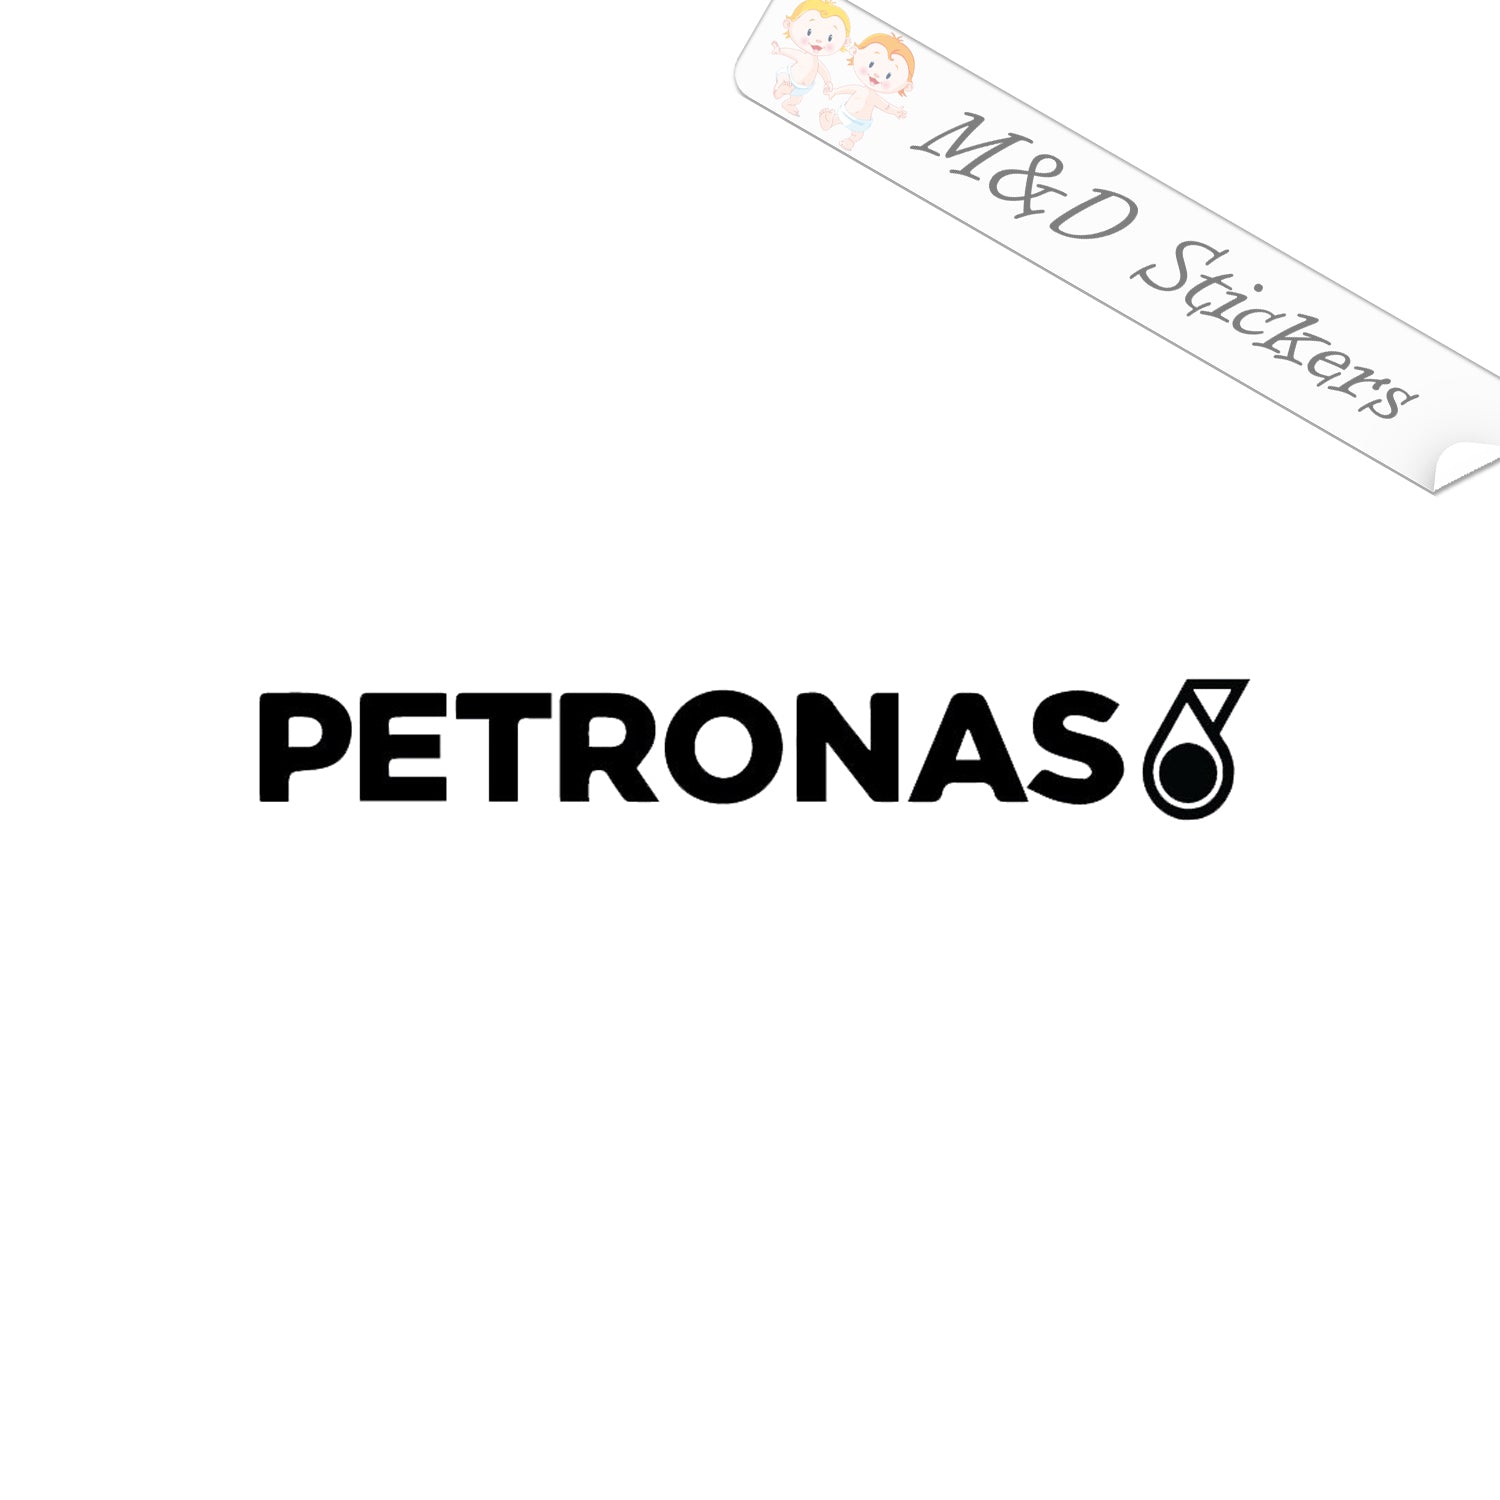 24hlemans #petronas #warsteiner Projects | Photos, videos, logos,  illustrations and branding on Behance